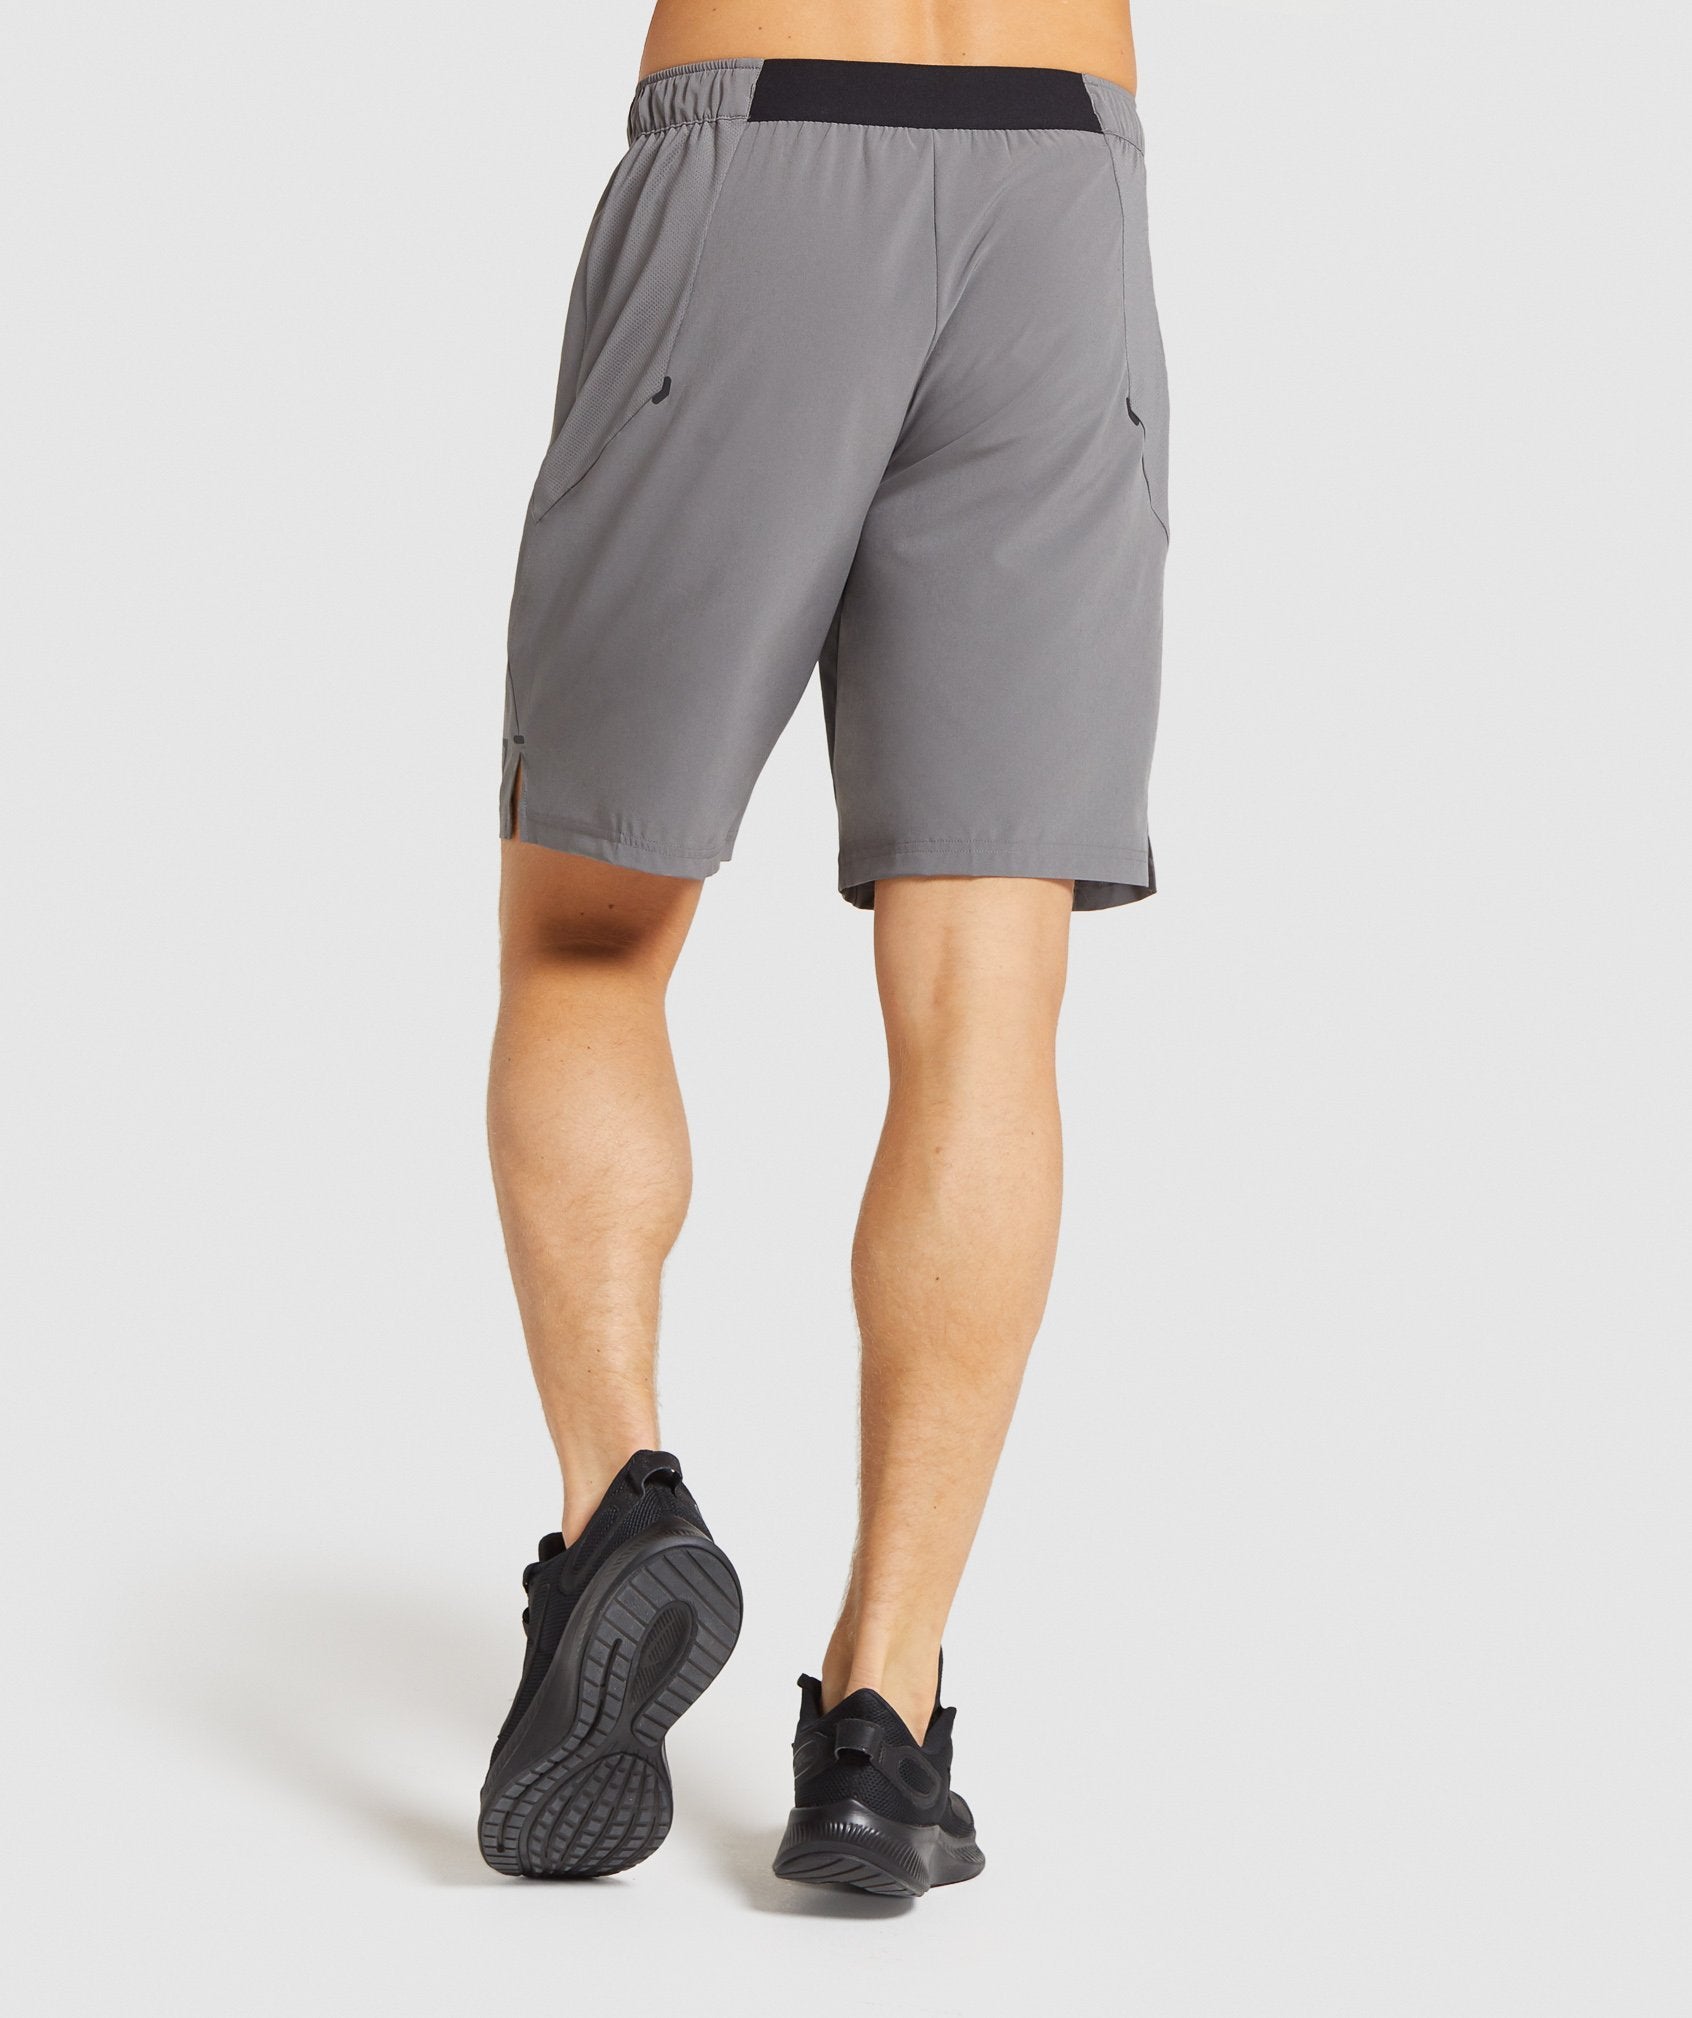 Element Hiit 9" Shorts in Grey - view 2